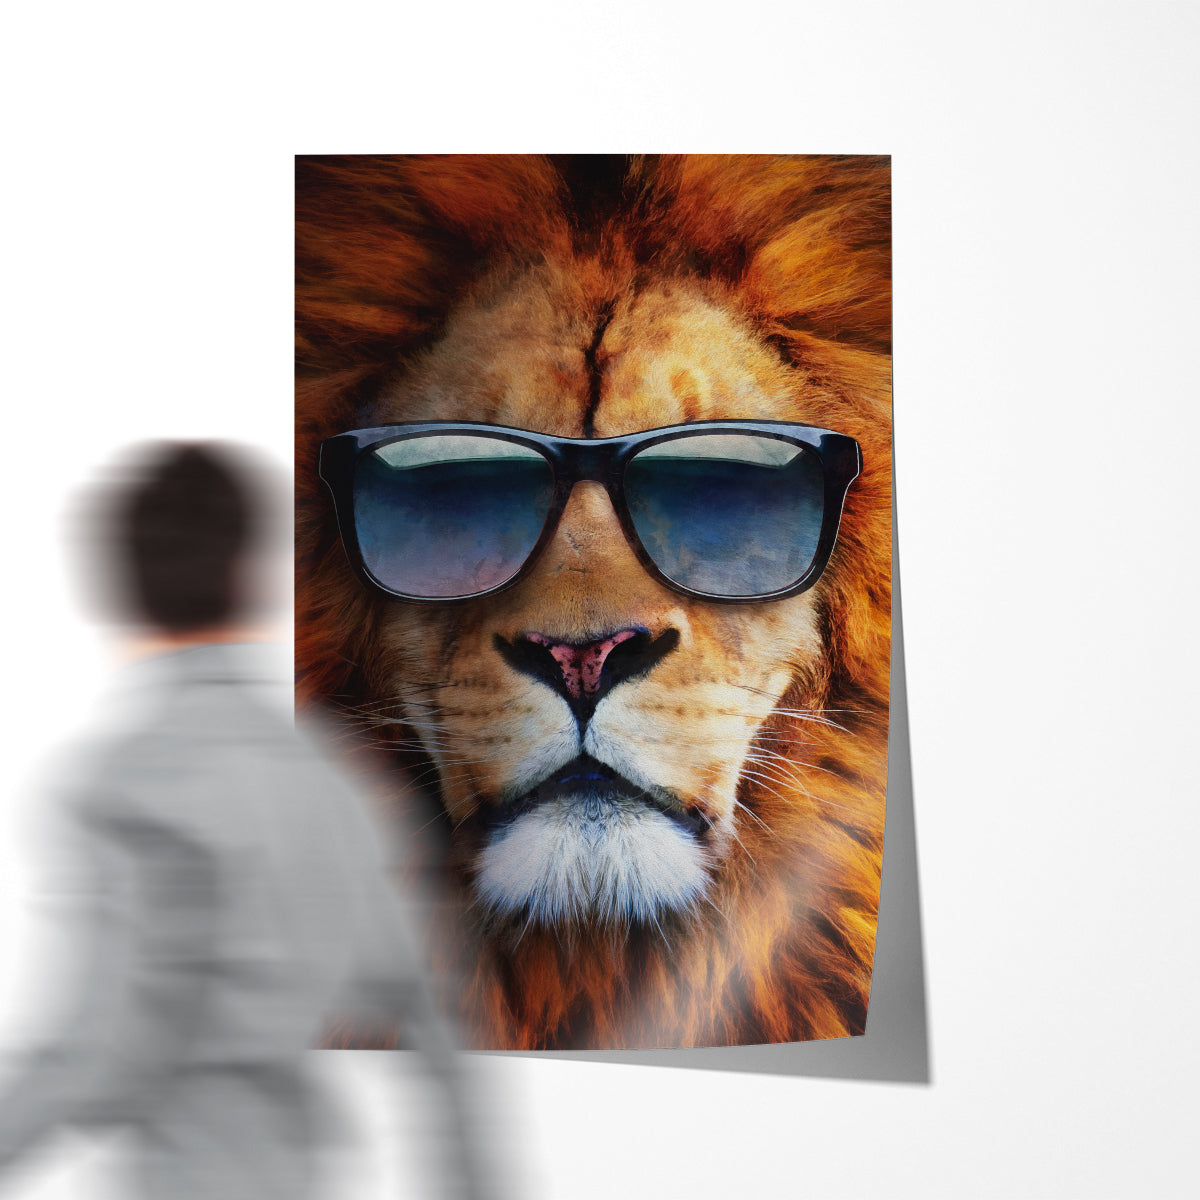 Handsome Lion with Sunglasses Poster Print Modern Wall Art-Vertical Posters NOT FRAMED-CetArt-8″x10″ inches-CetArt